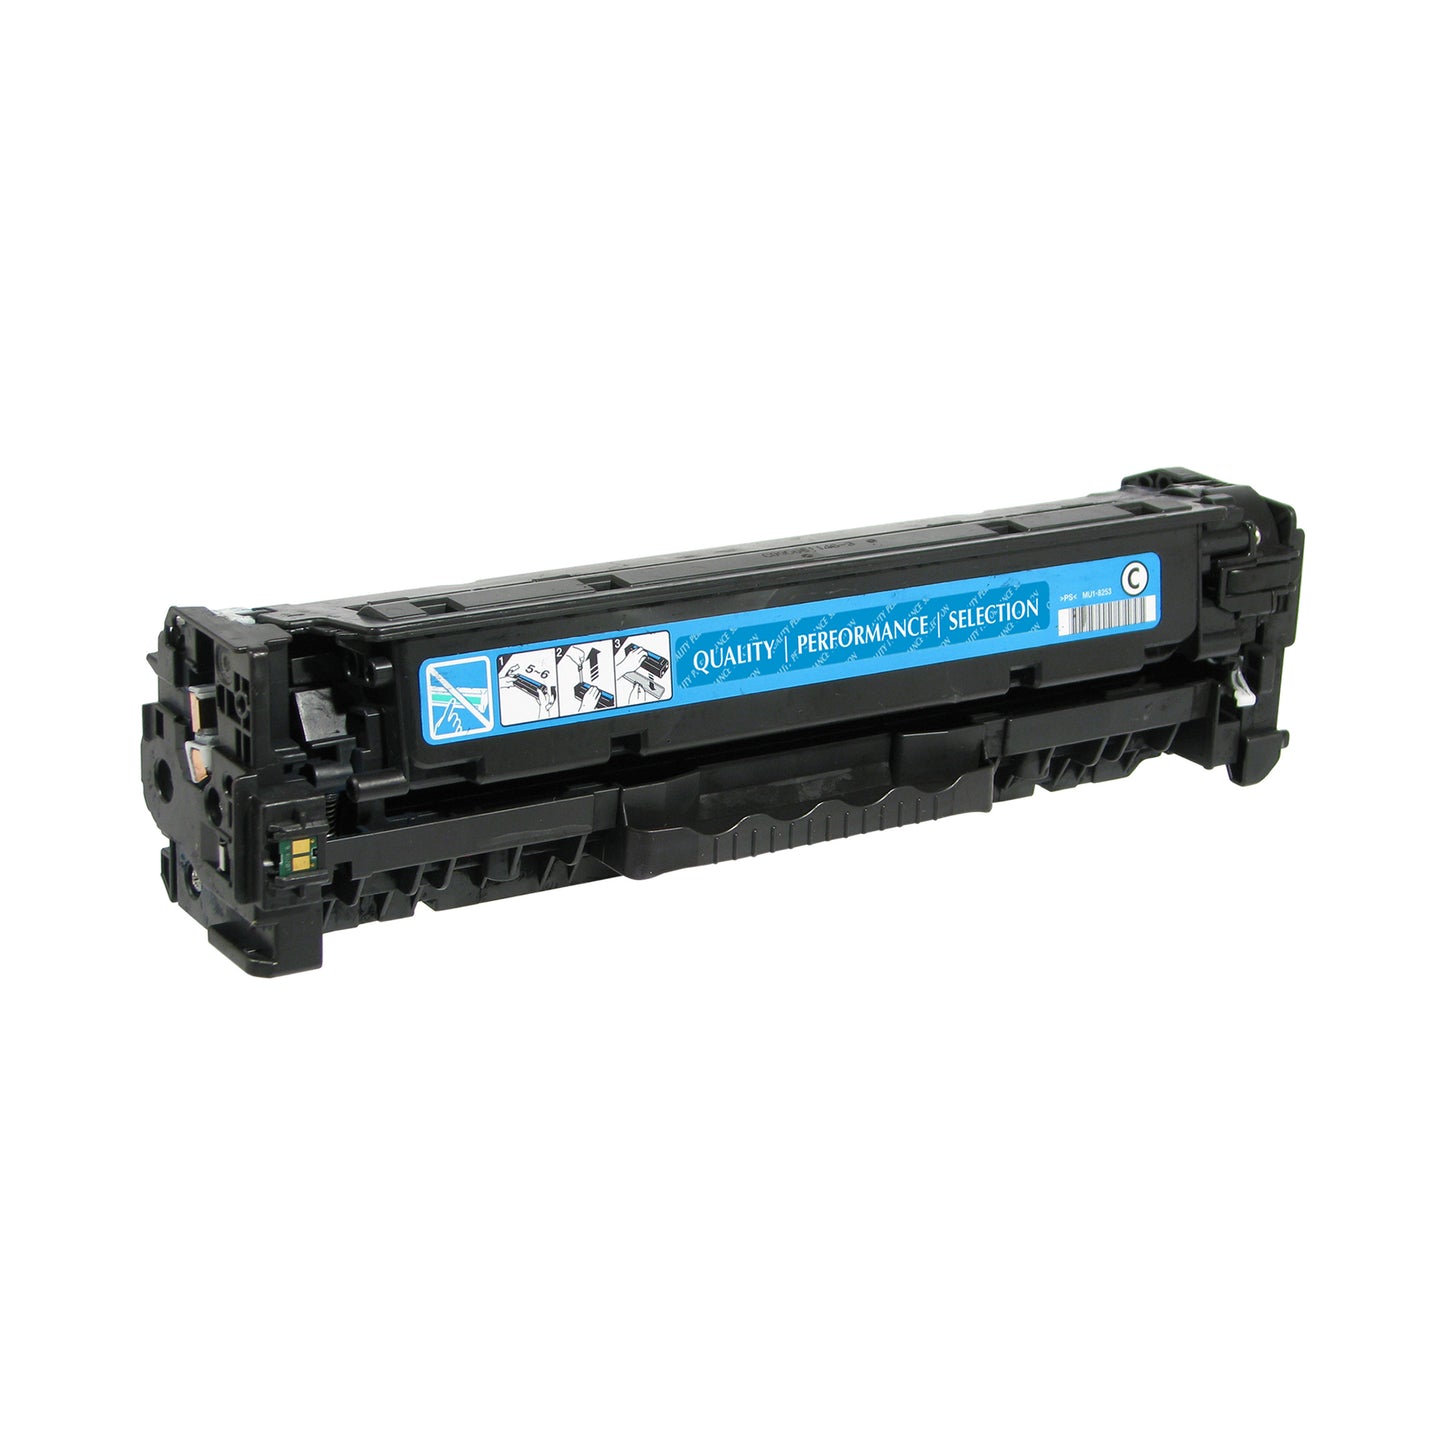 HP 305A (CE411A) Cyan Remanufactured Toner Cartridge [2,600 pages]